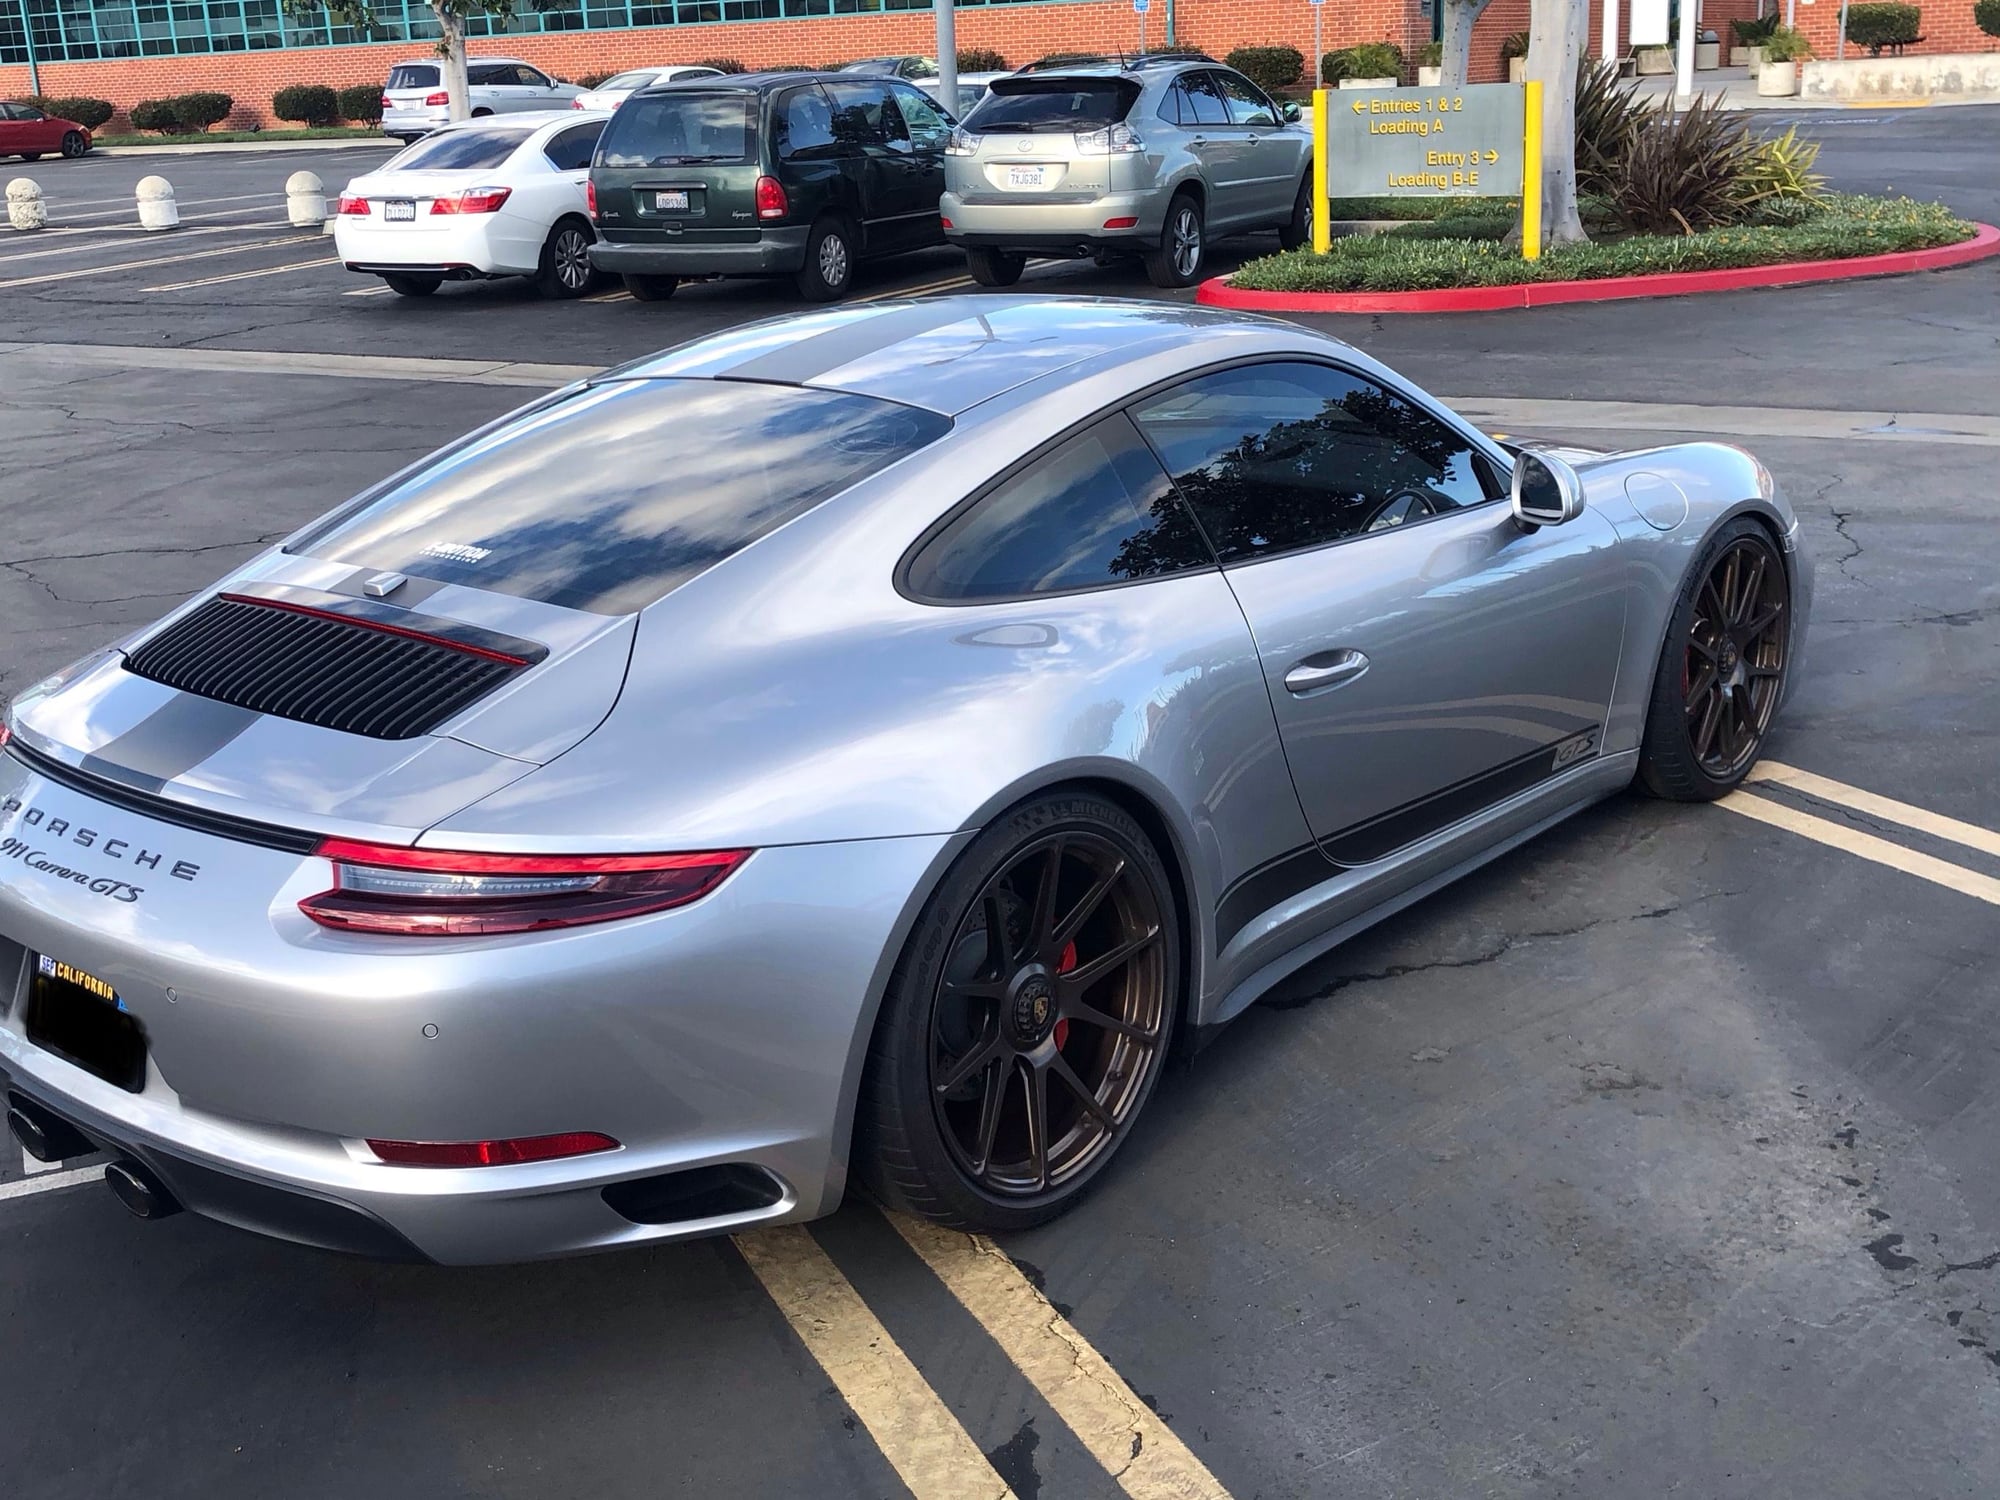 2018 Porsche 911 - 2018 GTS 991.2 GT SILVER PDK - Used - VIN WP0AB2A99JS122630 - 9,675 Miles - 6 cyl - 2WD - Automatic - Coupe - Silver - Los Angeles, CA 90064, United States